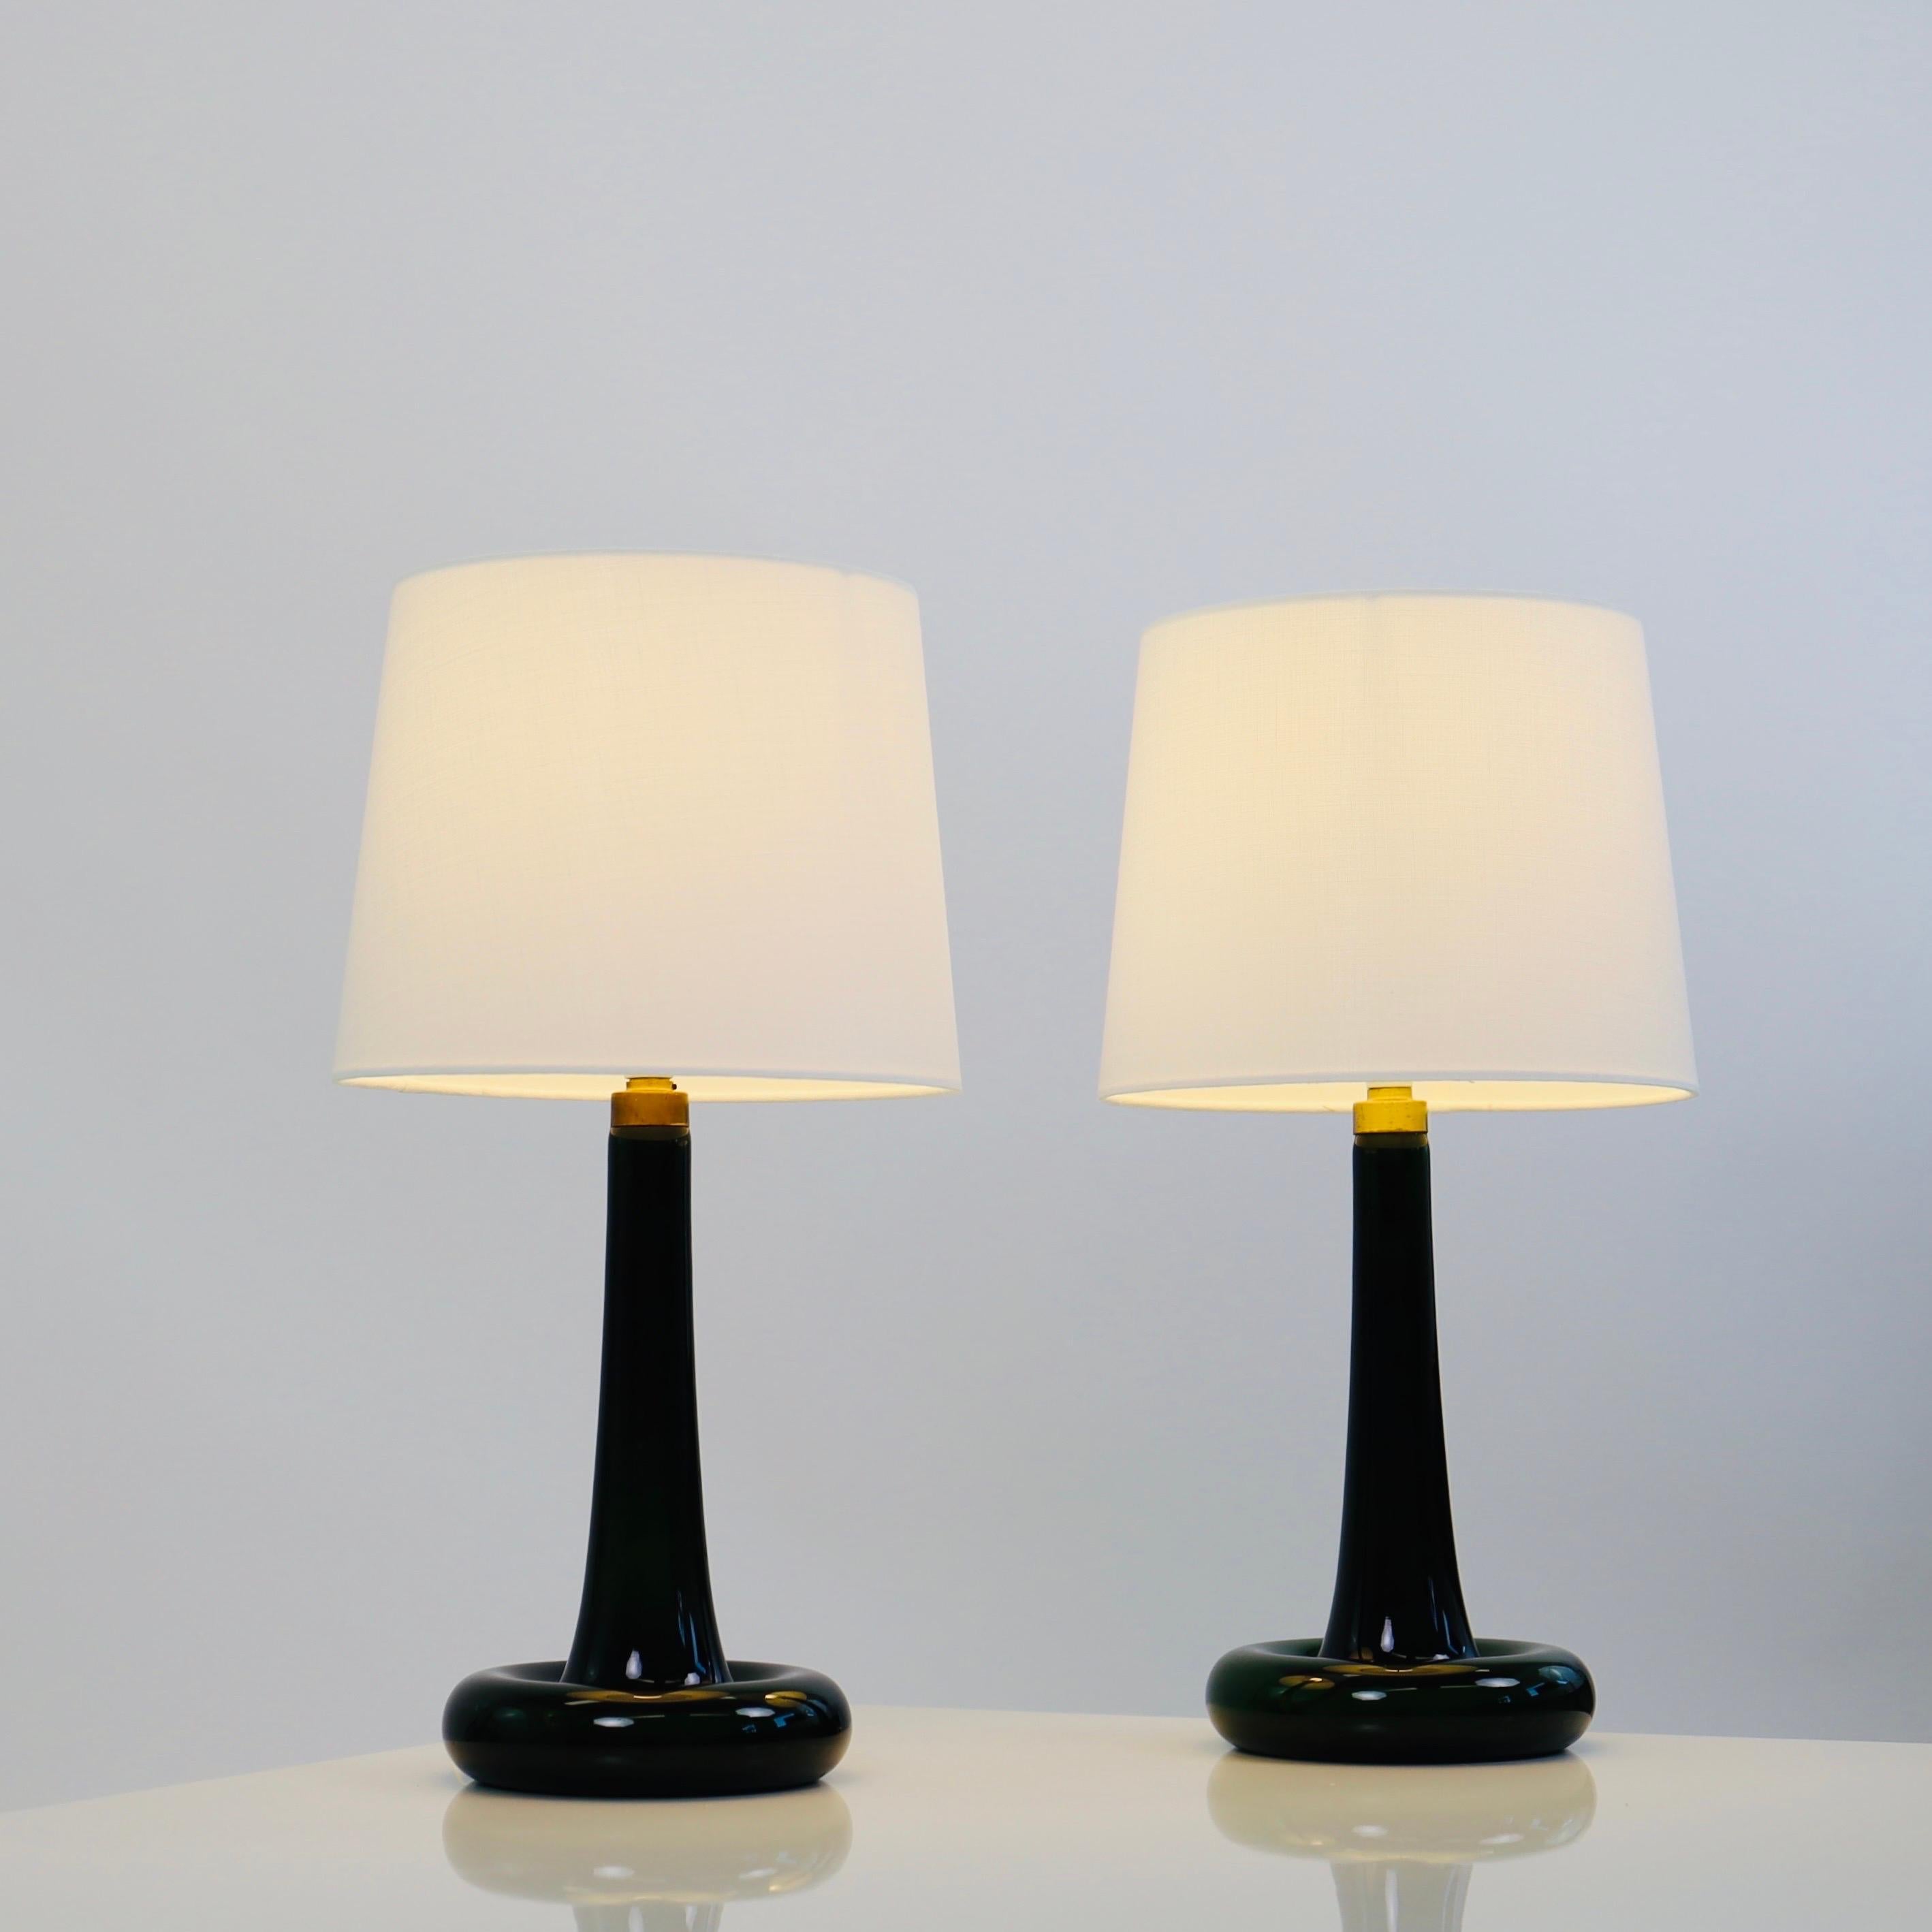 Set of Green Glass Desk Lamps by Michael Bang for Holmegaard, 1970s, Denmark For Sale 7